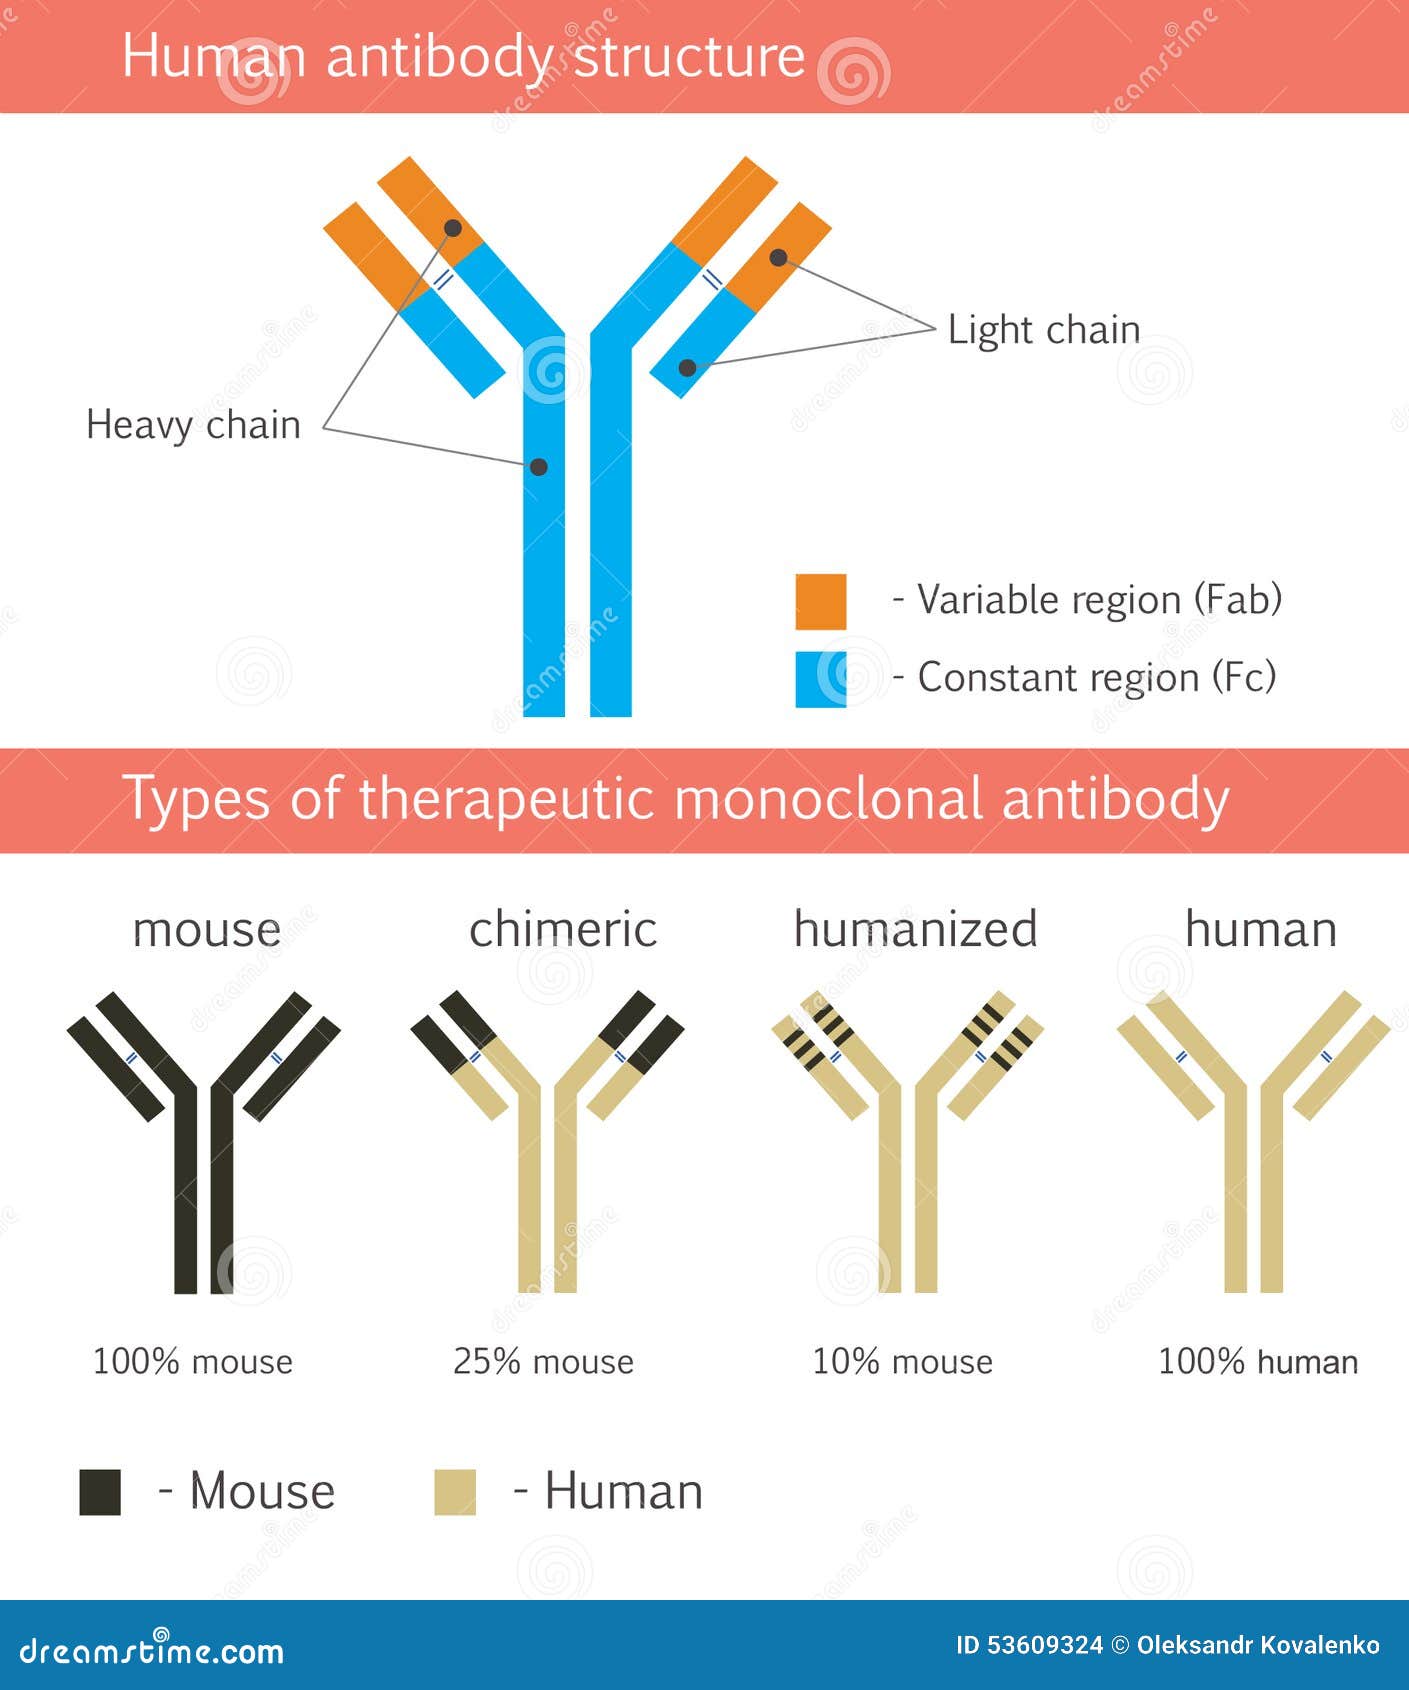 human antibody structure with therapeutic monoclonal antibodies